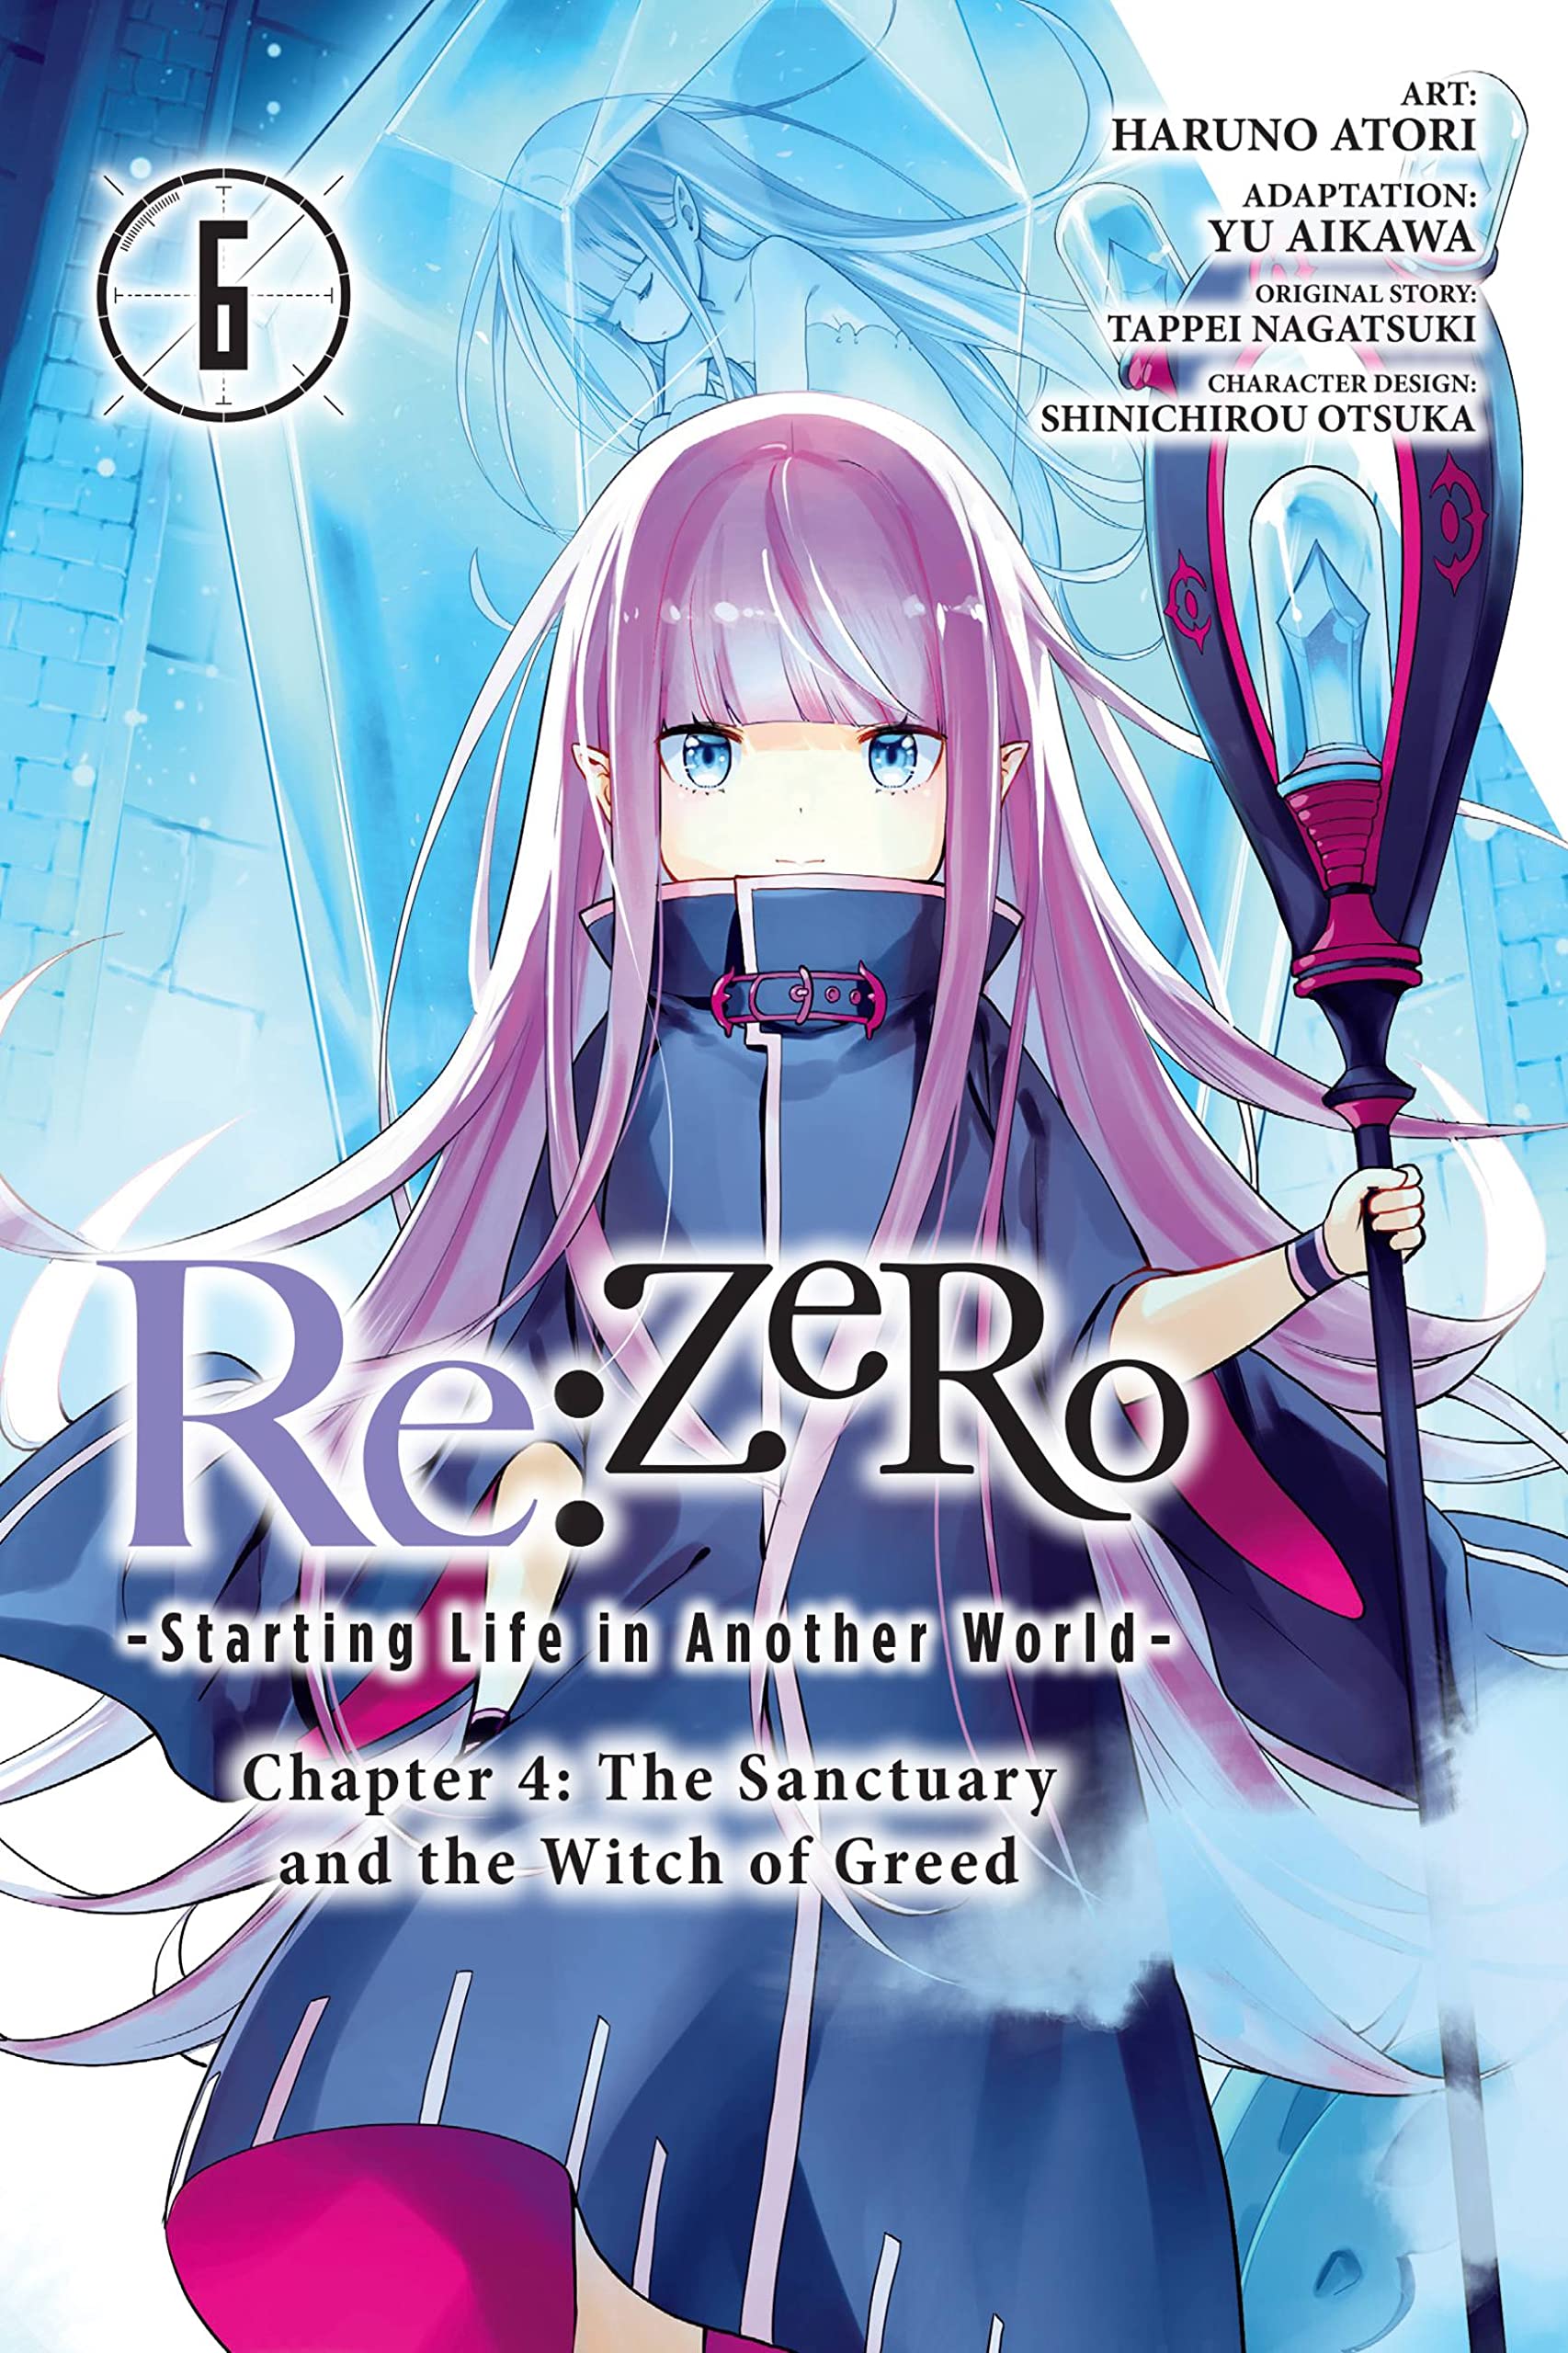 RE: Zero -Starting Life in Another World-, Chapter 4: The Sanctuary and the Witch of Greed Vol. 06 (Manga)